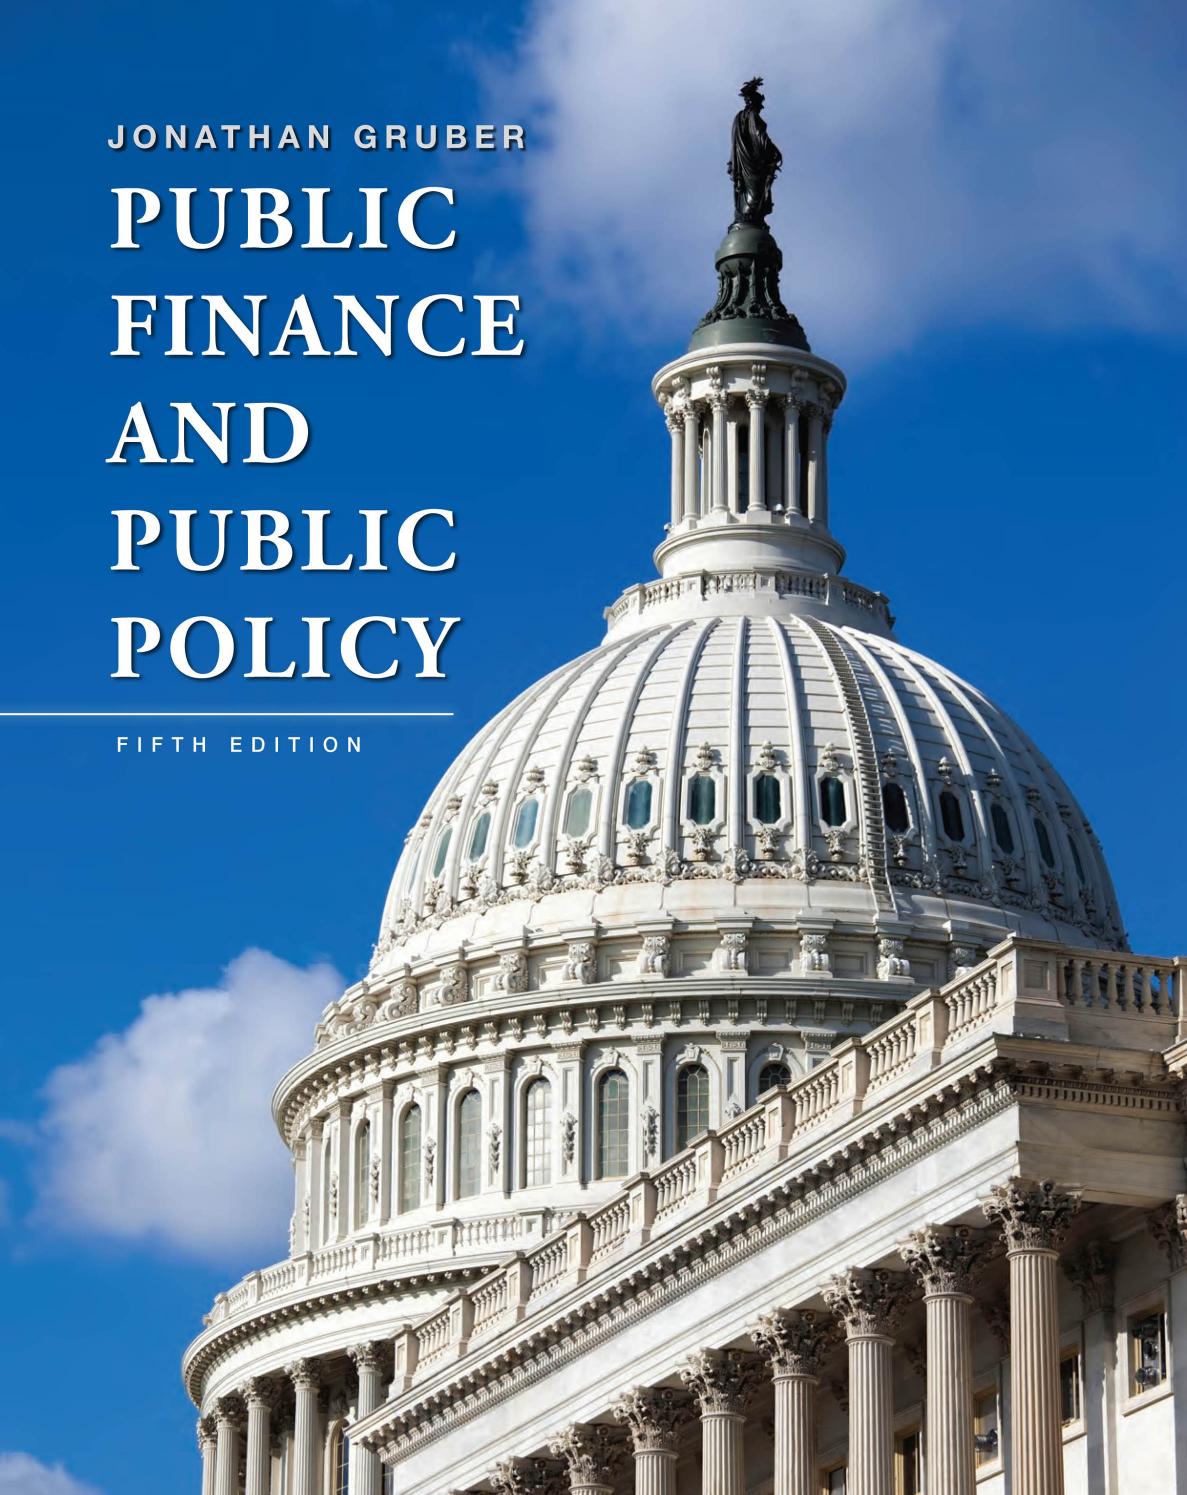 PUBLIC FINANCE AND PUBLIC POLICY, FIFTH EDITION